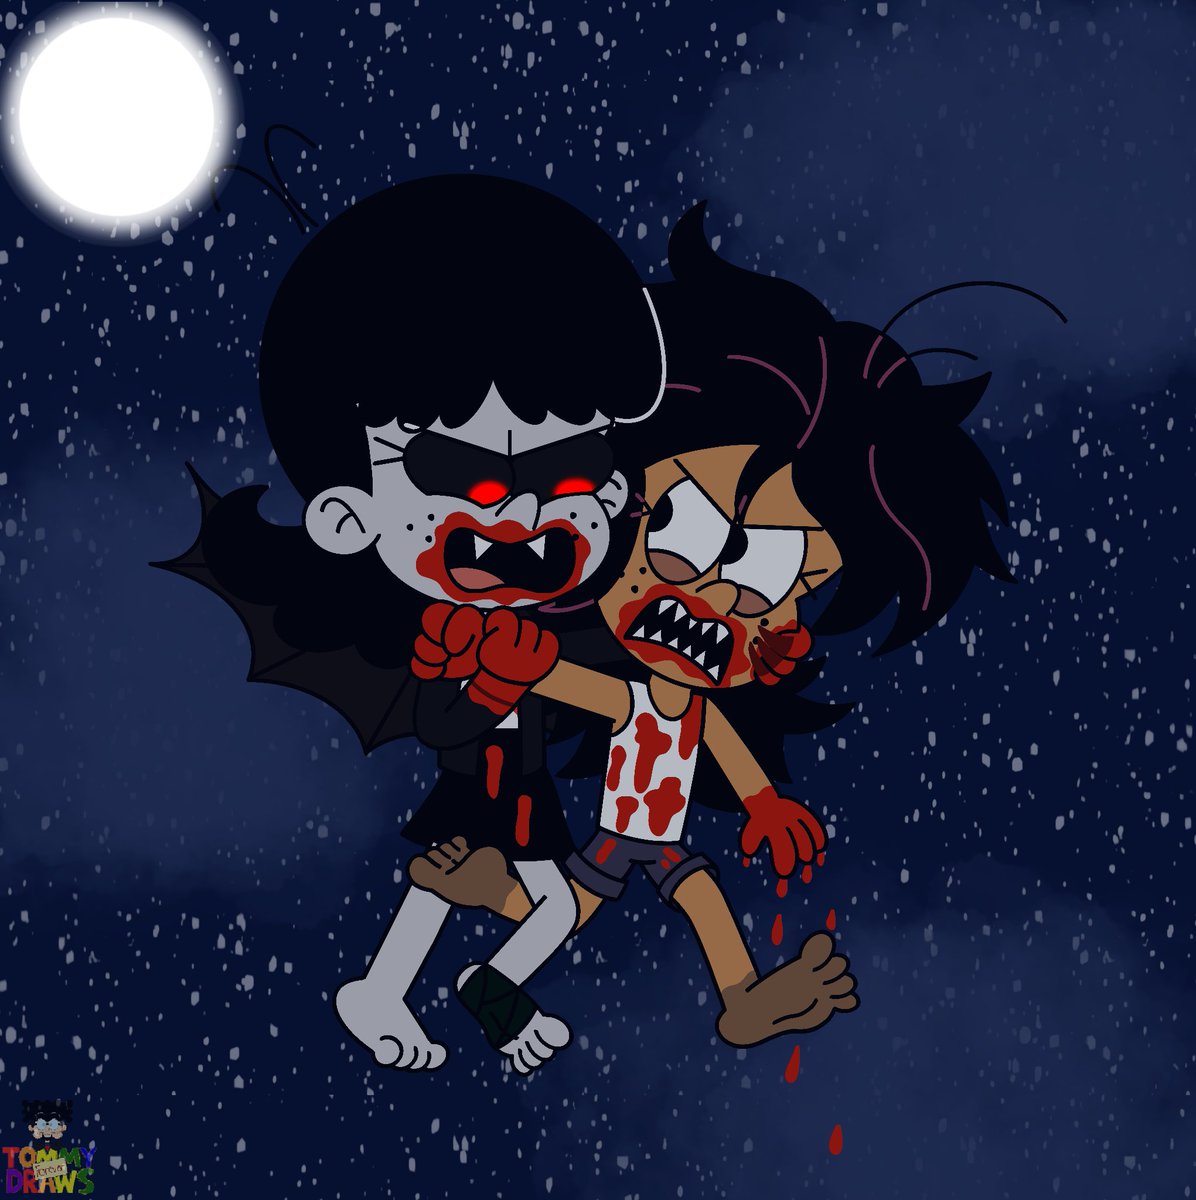 “Vampire Stella VS. Ronnie Anne”

Who do you think will win?

#drawing #art #theloudhouse #stellazhau #thecasagrandes #ronnieanne #vampire #cannibal #horror #blood #au